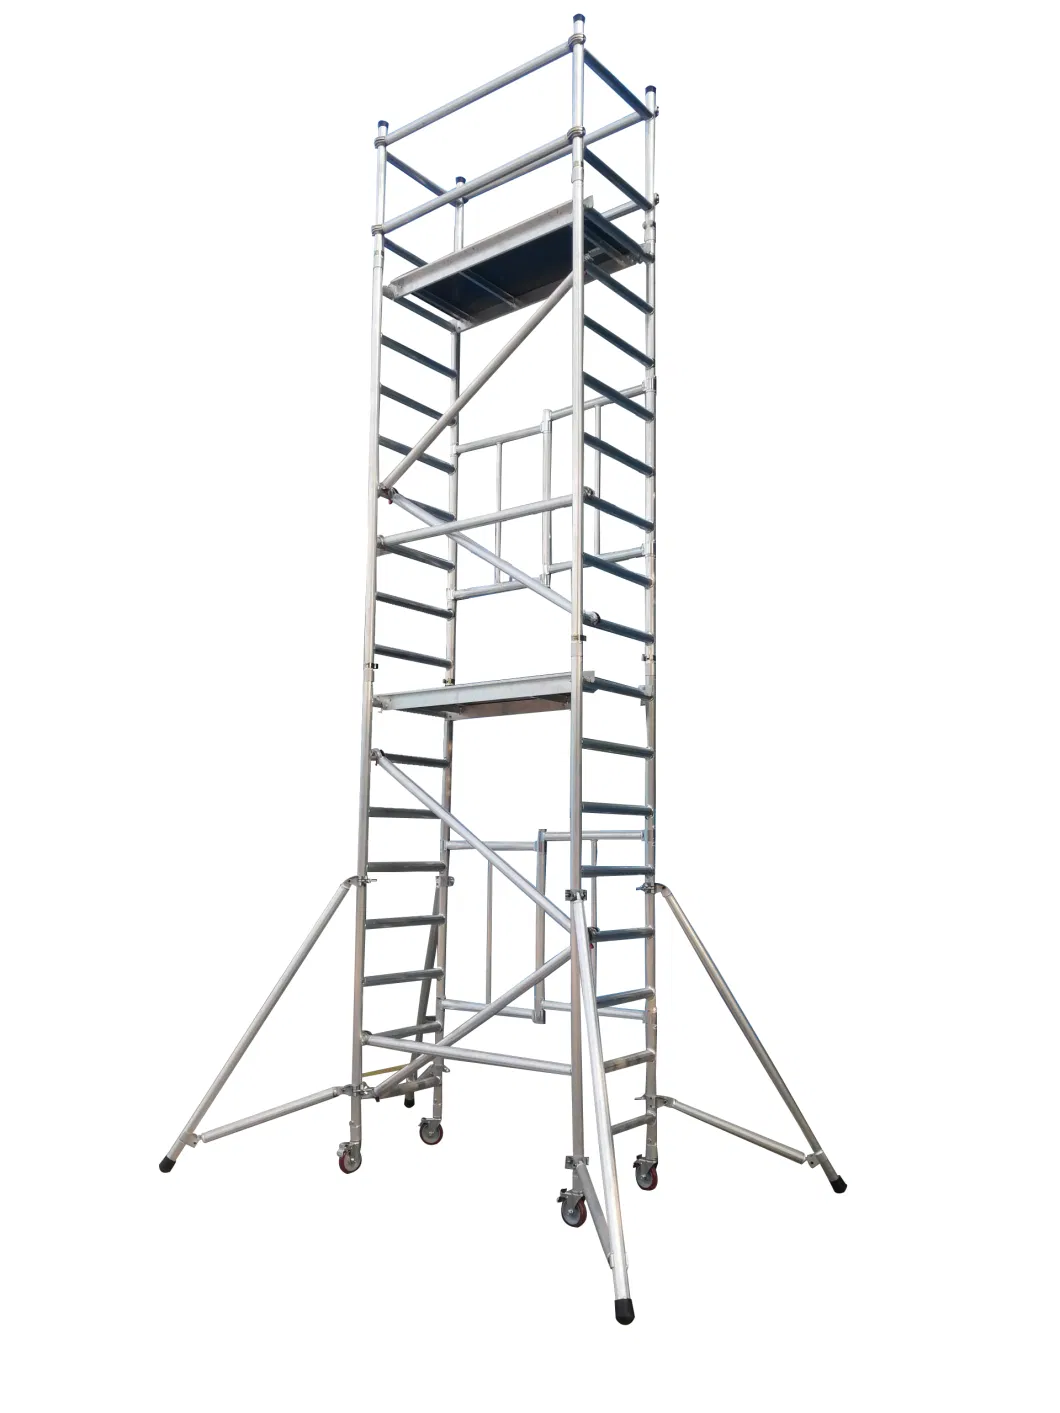 Dragonstage China Aluminum Stair Folding Scaffolding System Construction Scaffold for Sale for Installation Works